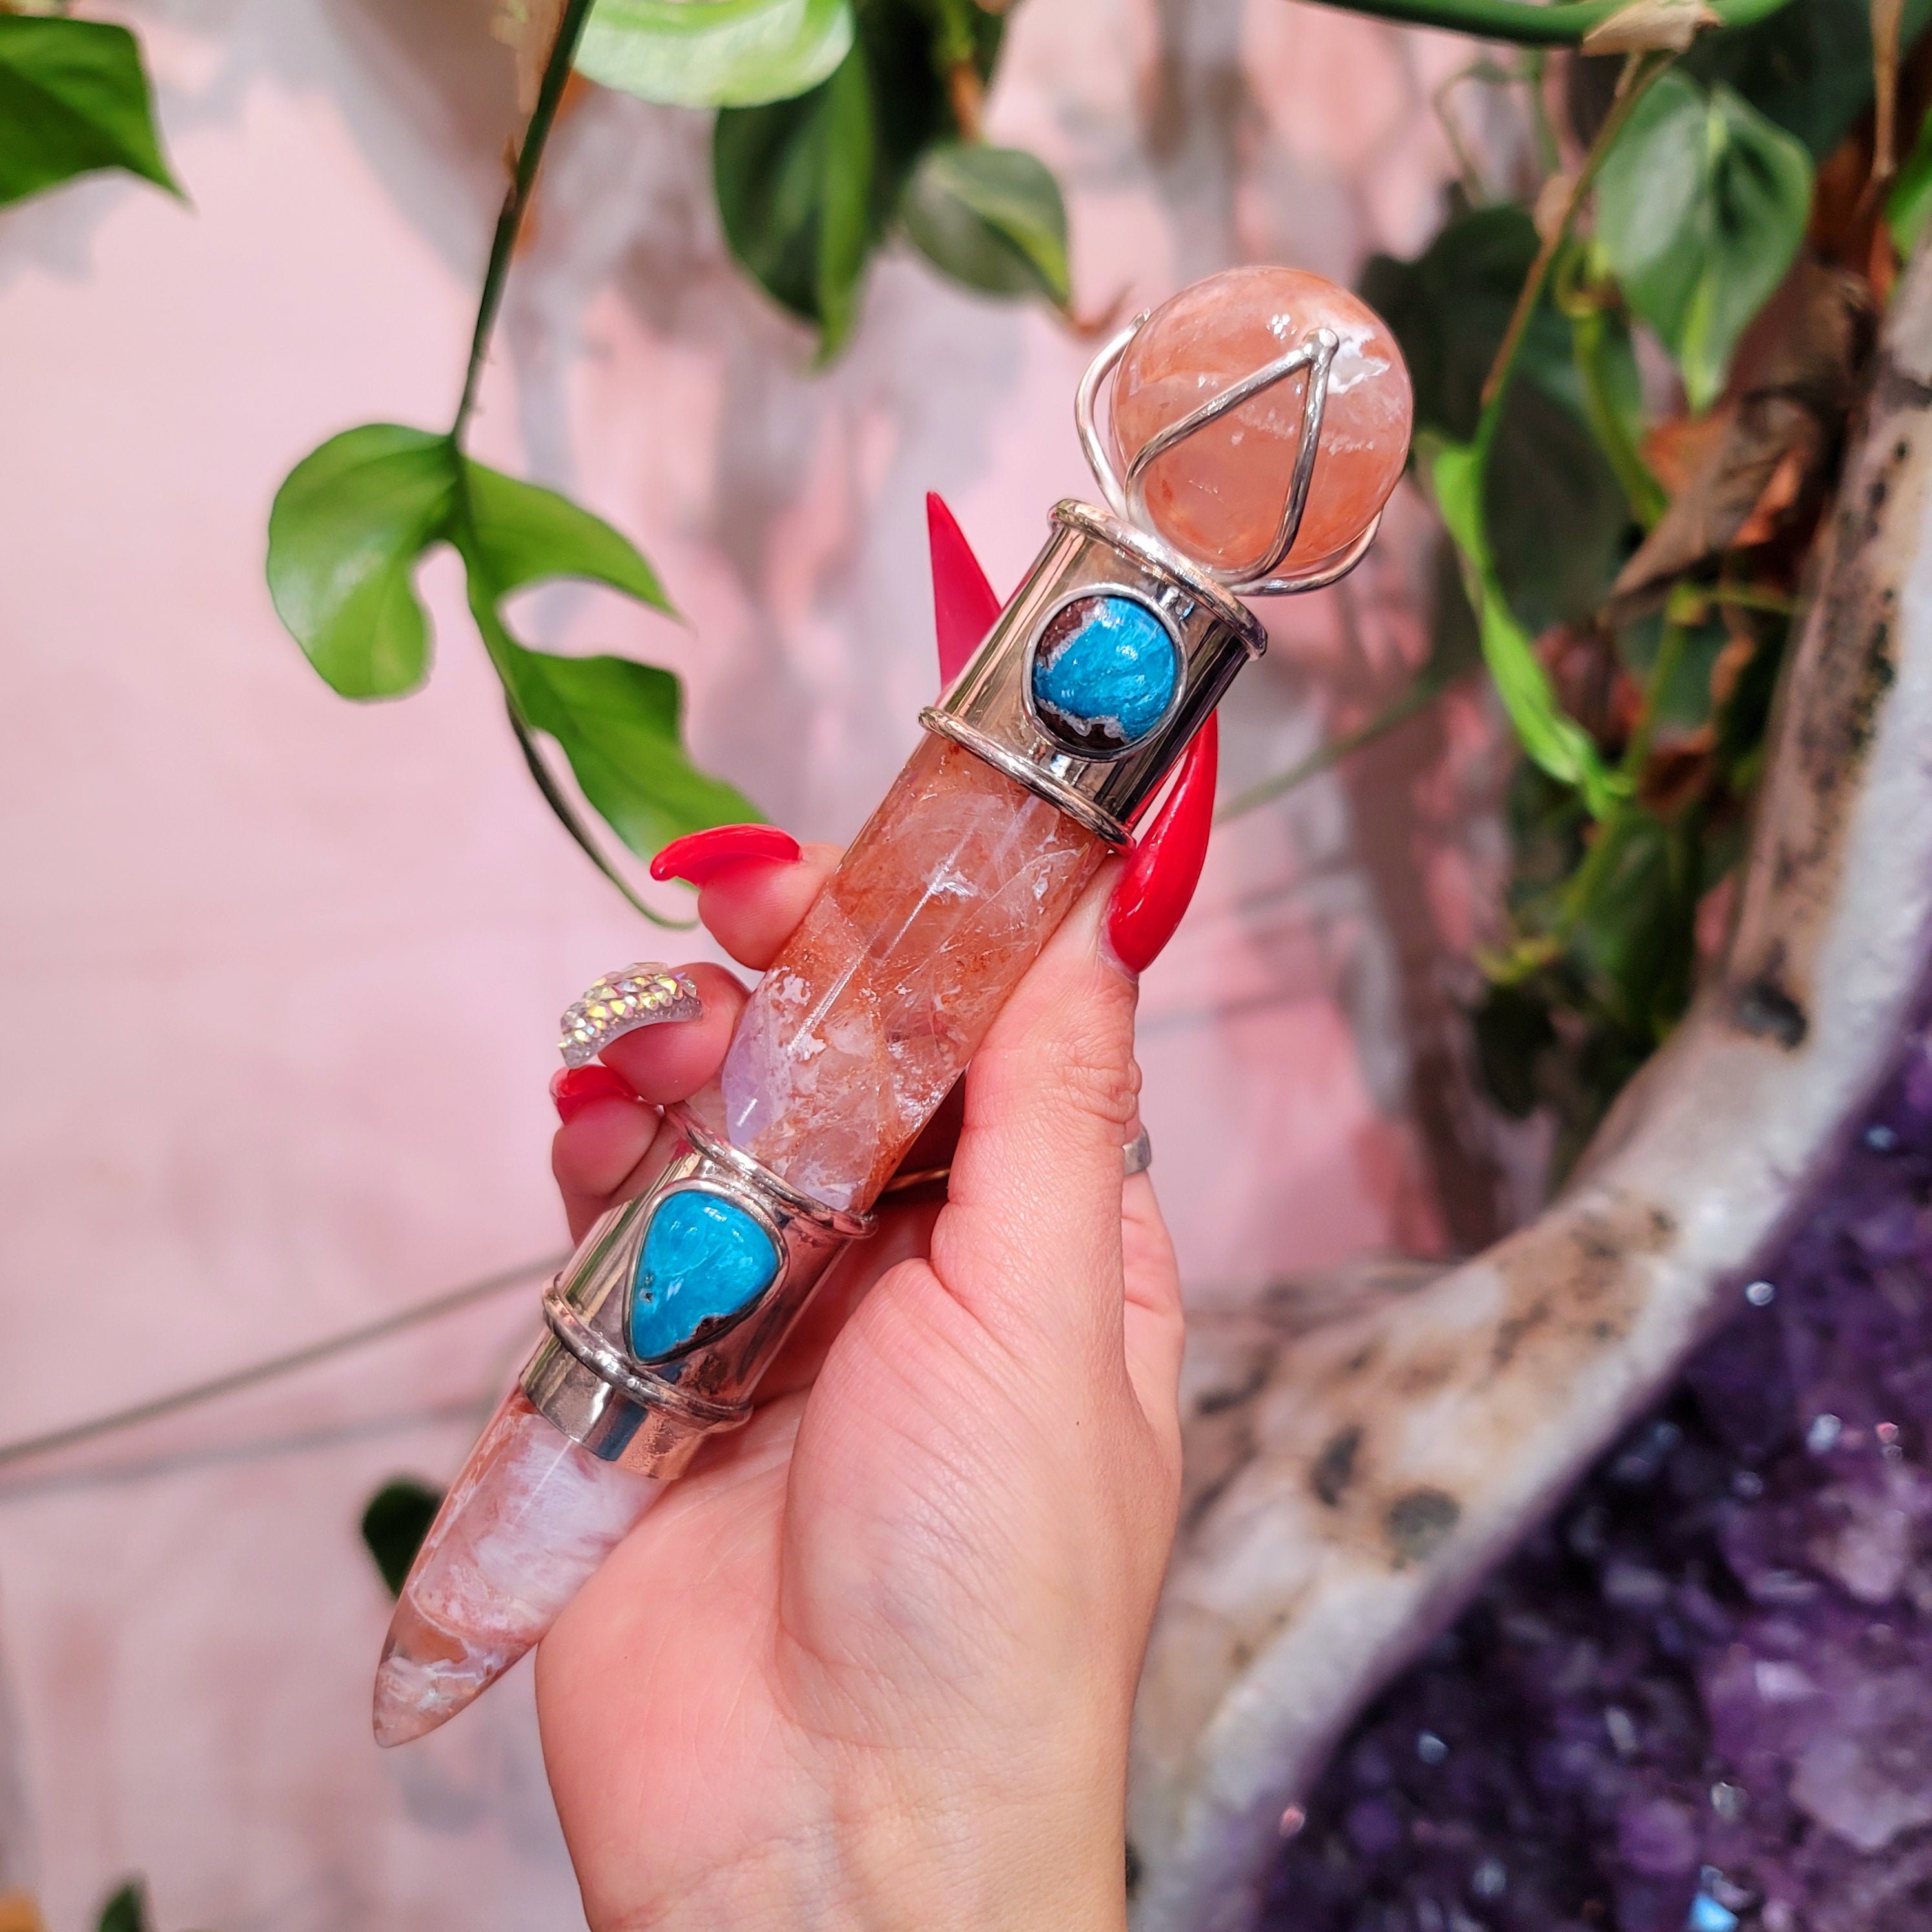 Fire Quartz and Cavansite Wand for Transmuting Negative Energy into Positive and Unlocking your Intuitive Abilities